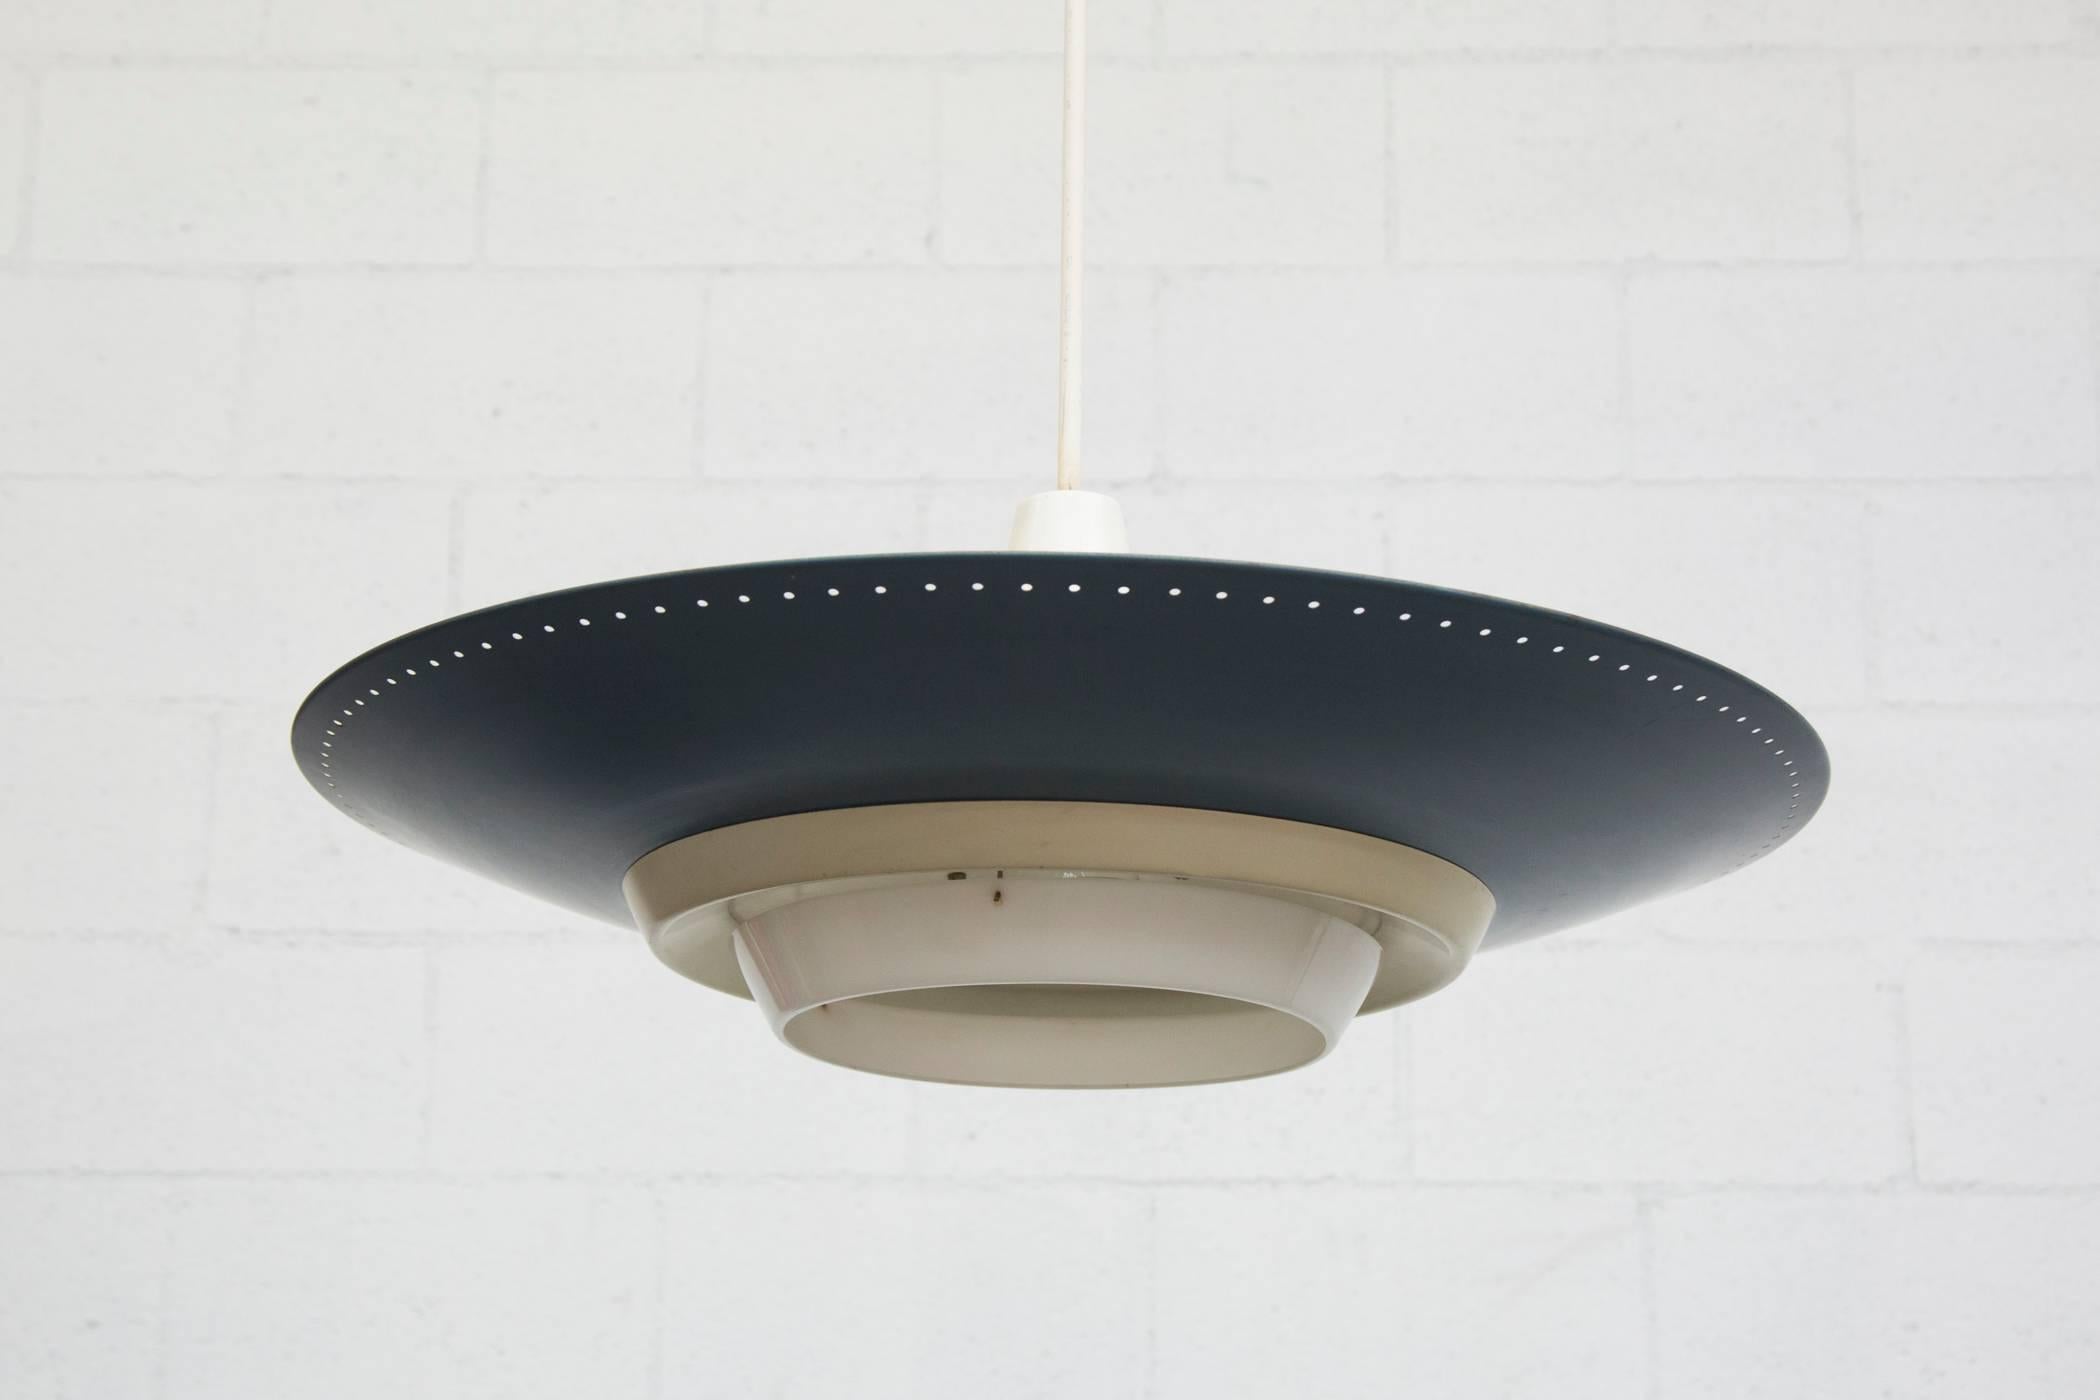 Original 1950s Industrial enameled metal rondelle ceiling pendant. Deep blue enameled spun aluminum shade with perforated edge, and bone white accents. Triple light sockets for uplighting and a single spot for below, 1950-1960. Very original